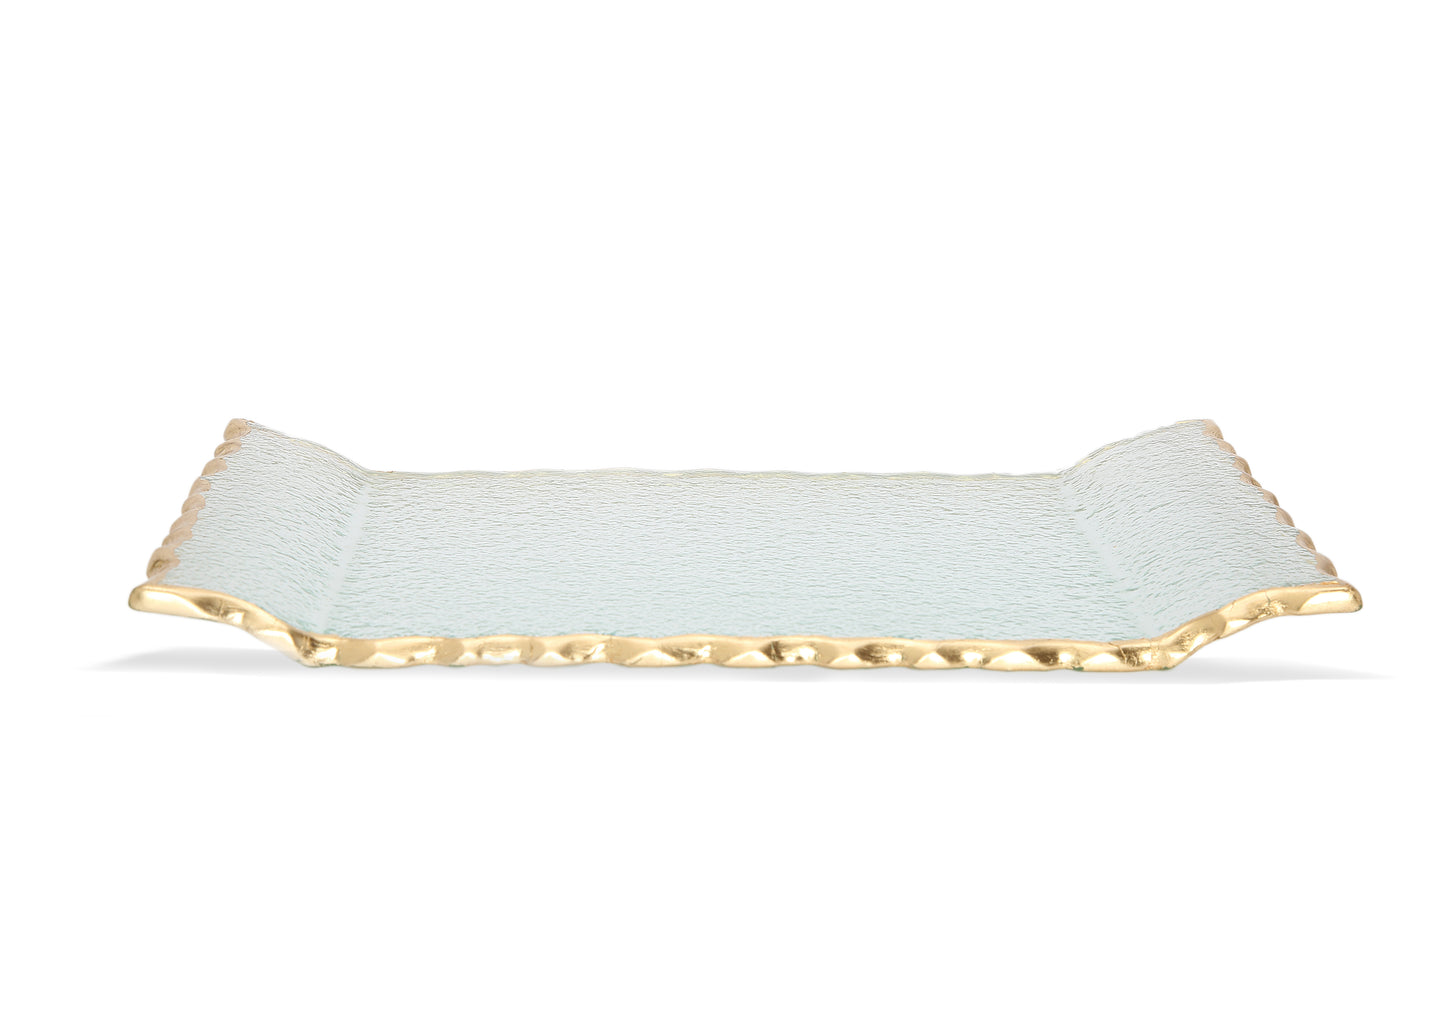 Glass Oblong Tray with Gold Edge 11